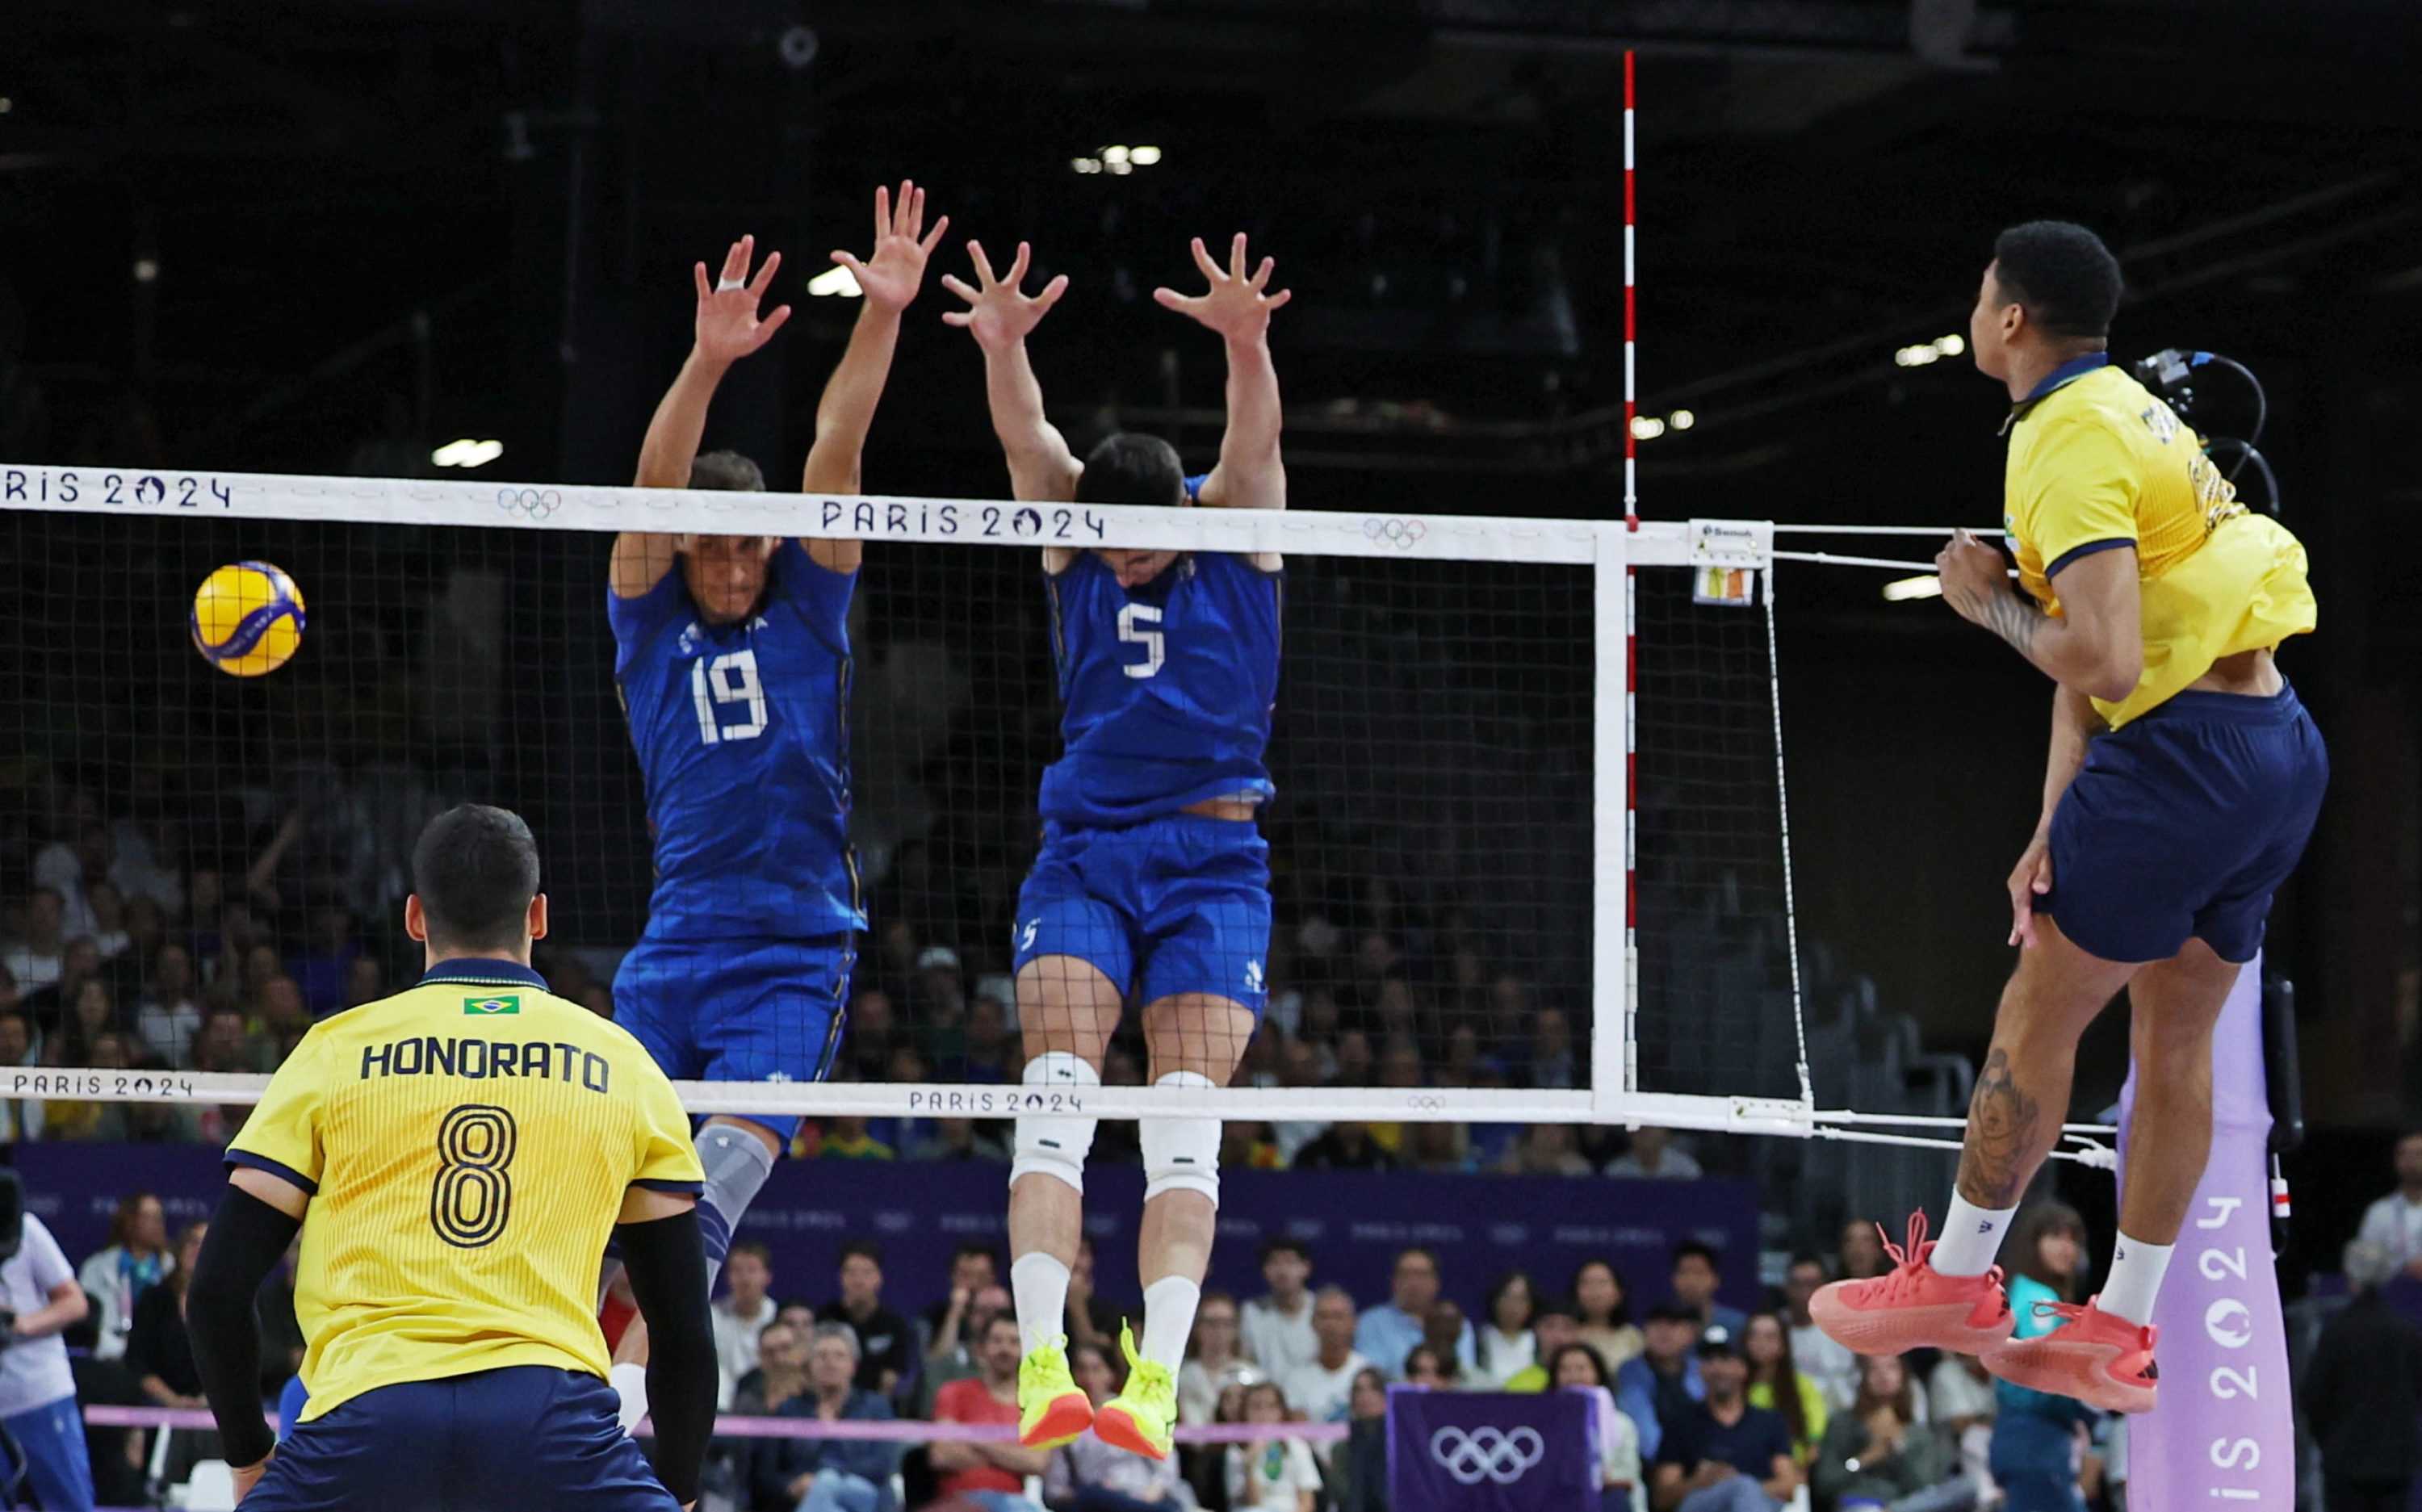 epa11499057 Roberto Russo (C-L) and Alessandro Micieletto (C-R) of Italy in action during the Men Preliminary Round Pool B match Italy vs Brazil of the Volleyball competitions in the Paris 2024 Olympic Games, at the South Paris Arena in Paris, France, 27 July 2024.  EPA/MOHAMMED BADRA